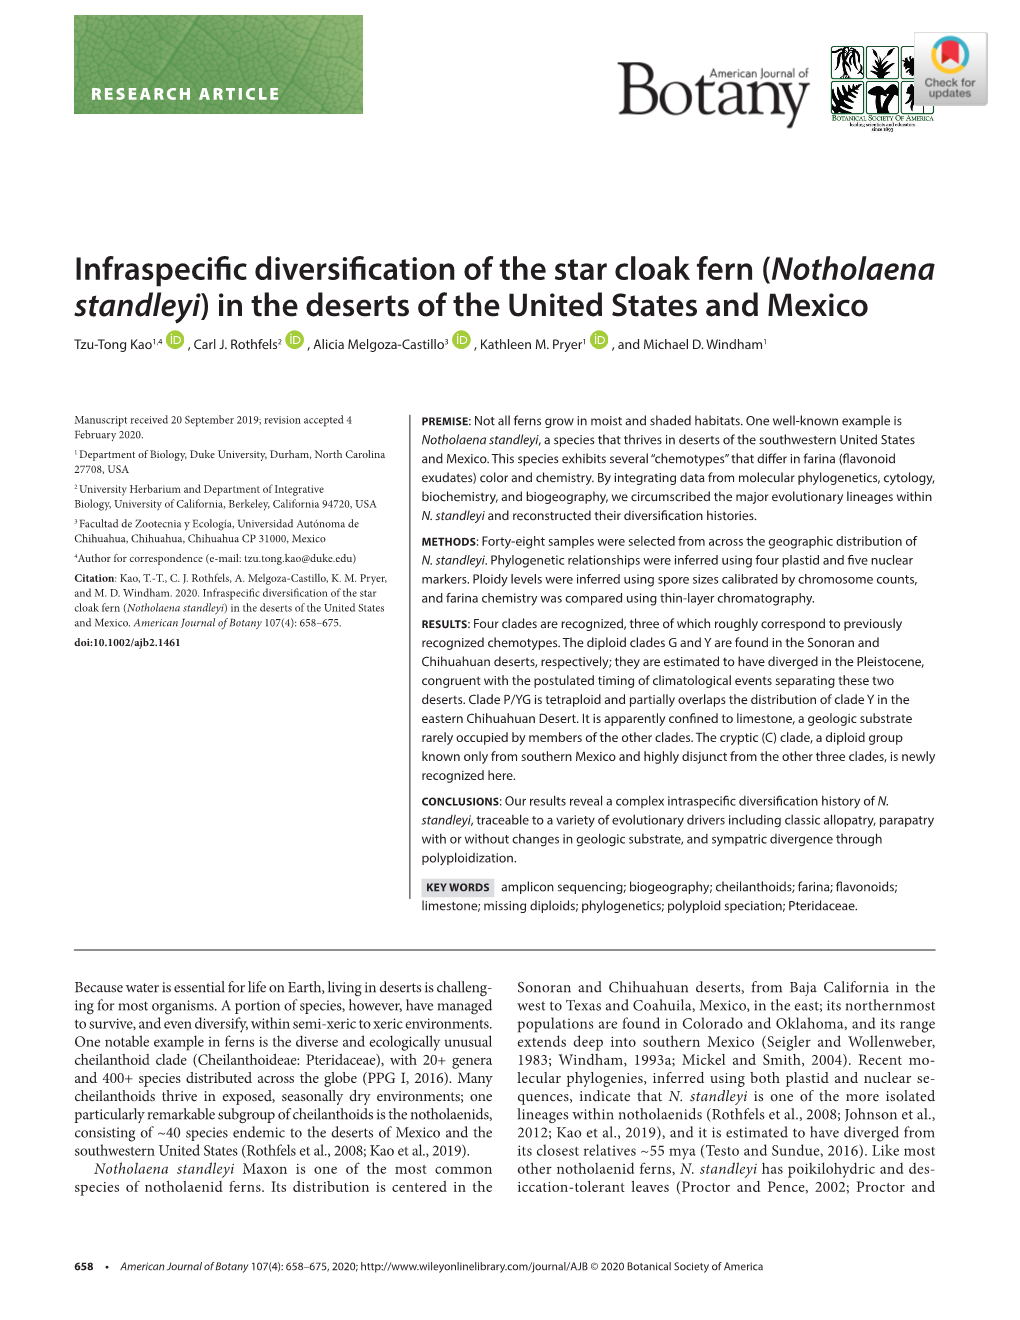 (Notholaena Standleyi) in the Deserts of the United States and Mexico